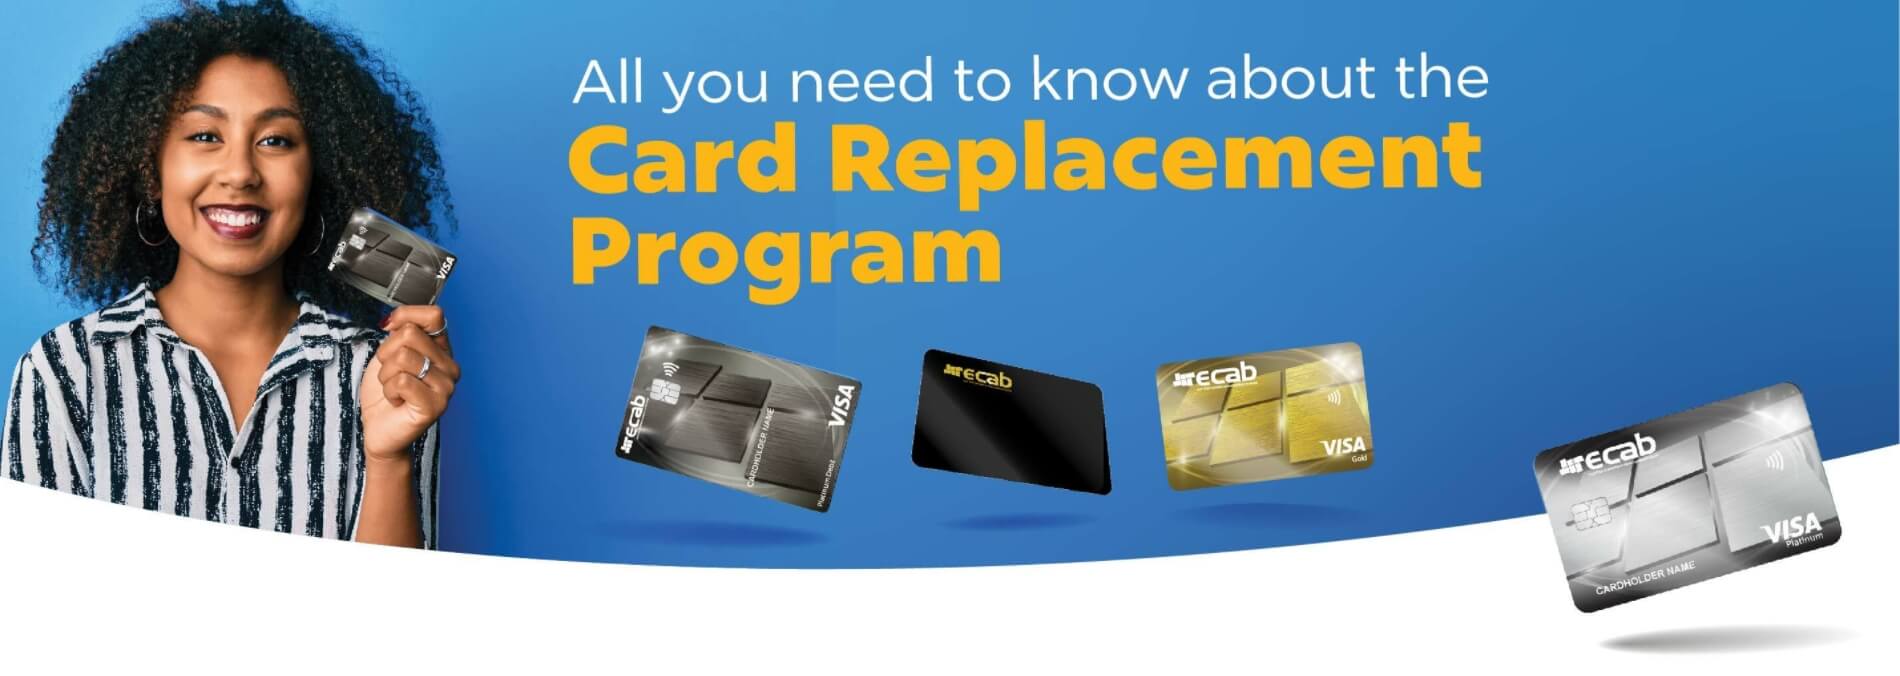 Card Replacement Program